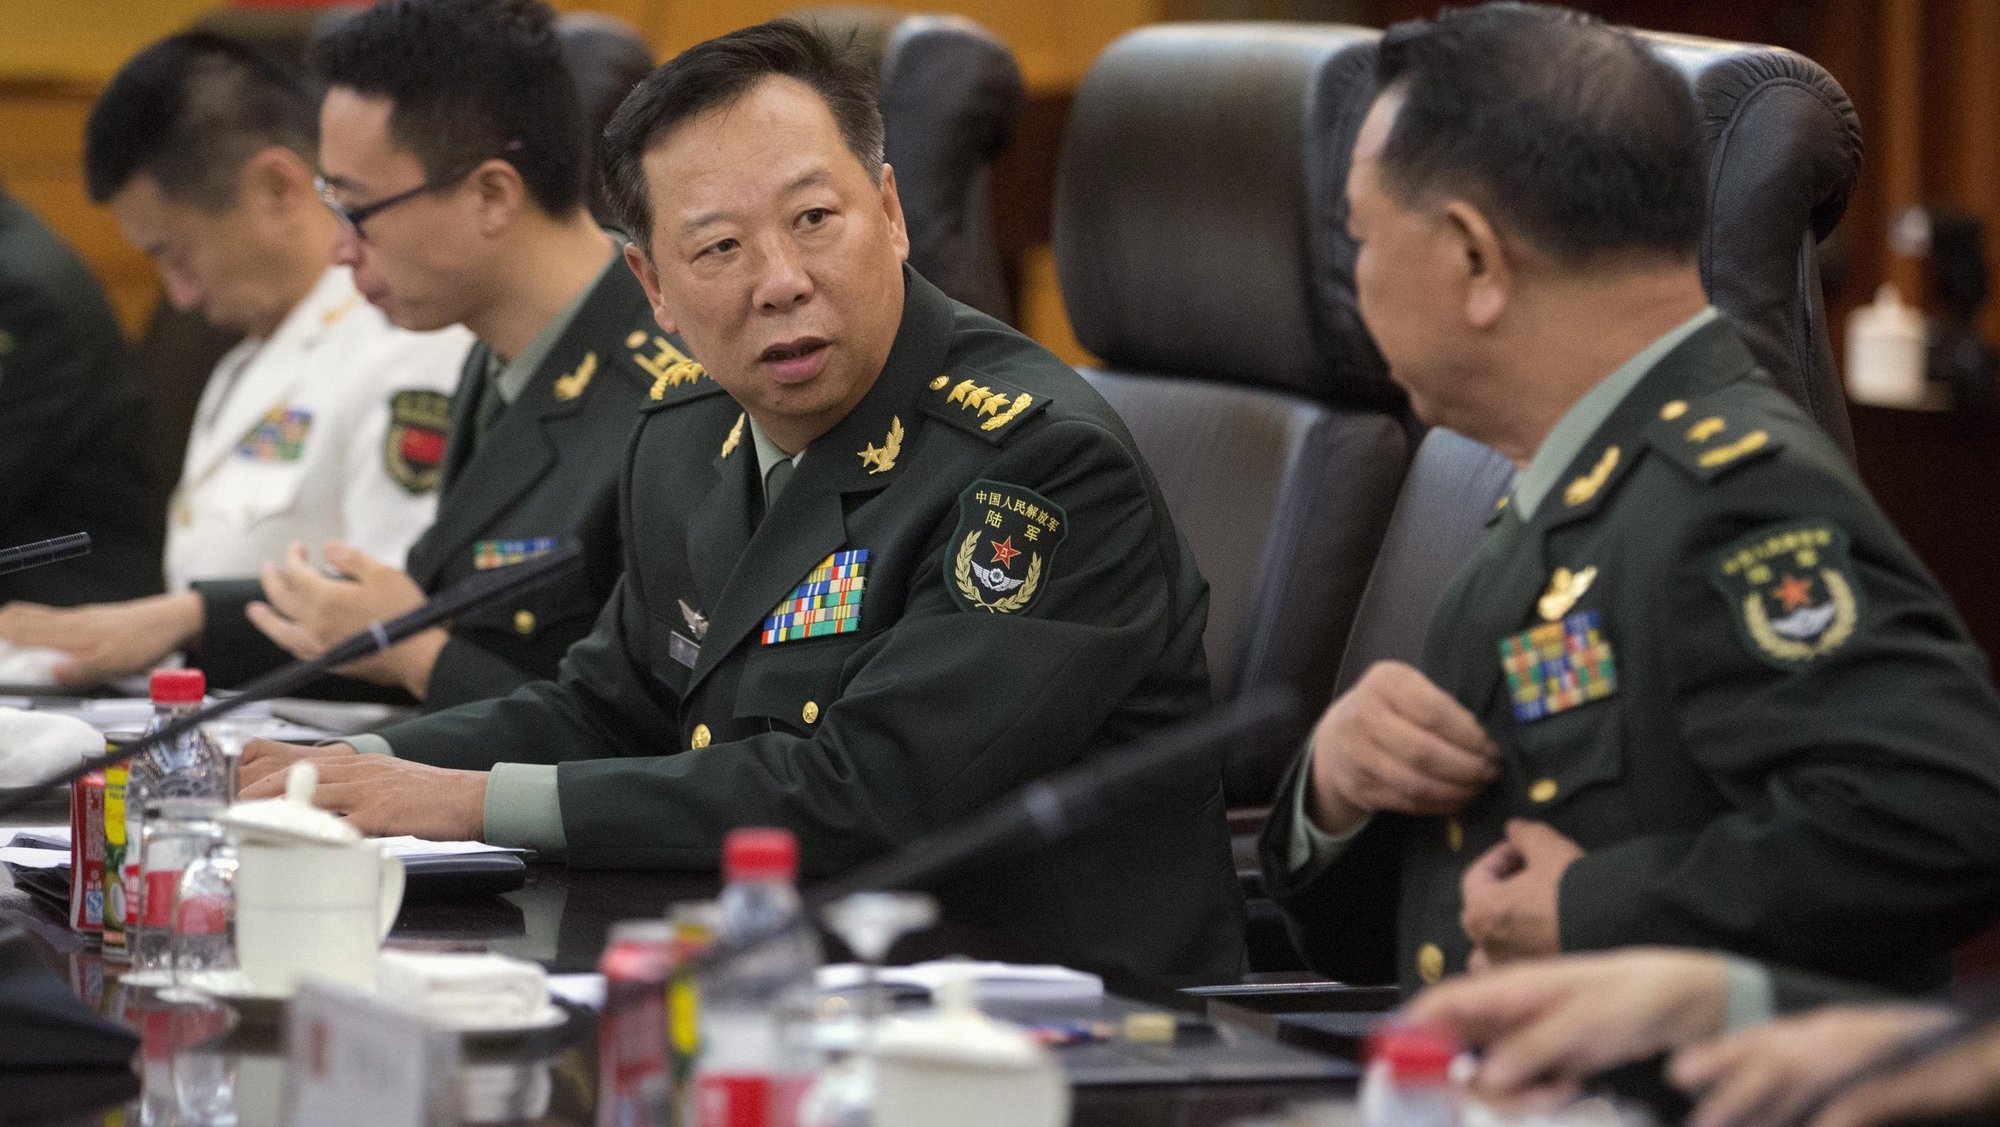 epa05489122 China&#039;s People&#039;s Liberation Army (PLA) General Li Zuocheng (C) speaks during a meeting with U.S. Army Chief of Staff General Mark Milley (unseen) at the Bayi Building in Beijing, 16 August 2016. Others are not identified. The 39th U.S. Army Chief of Staff is visiting the Asia-Pacific region, including China, South Korea, Japan and Hawaii from 15 to 23 August, according to an U.S. Army press release.  EPA/MARK SCHIEFELBEIN / POOL